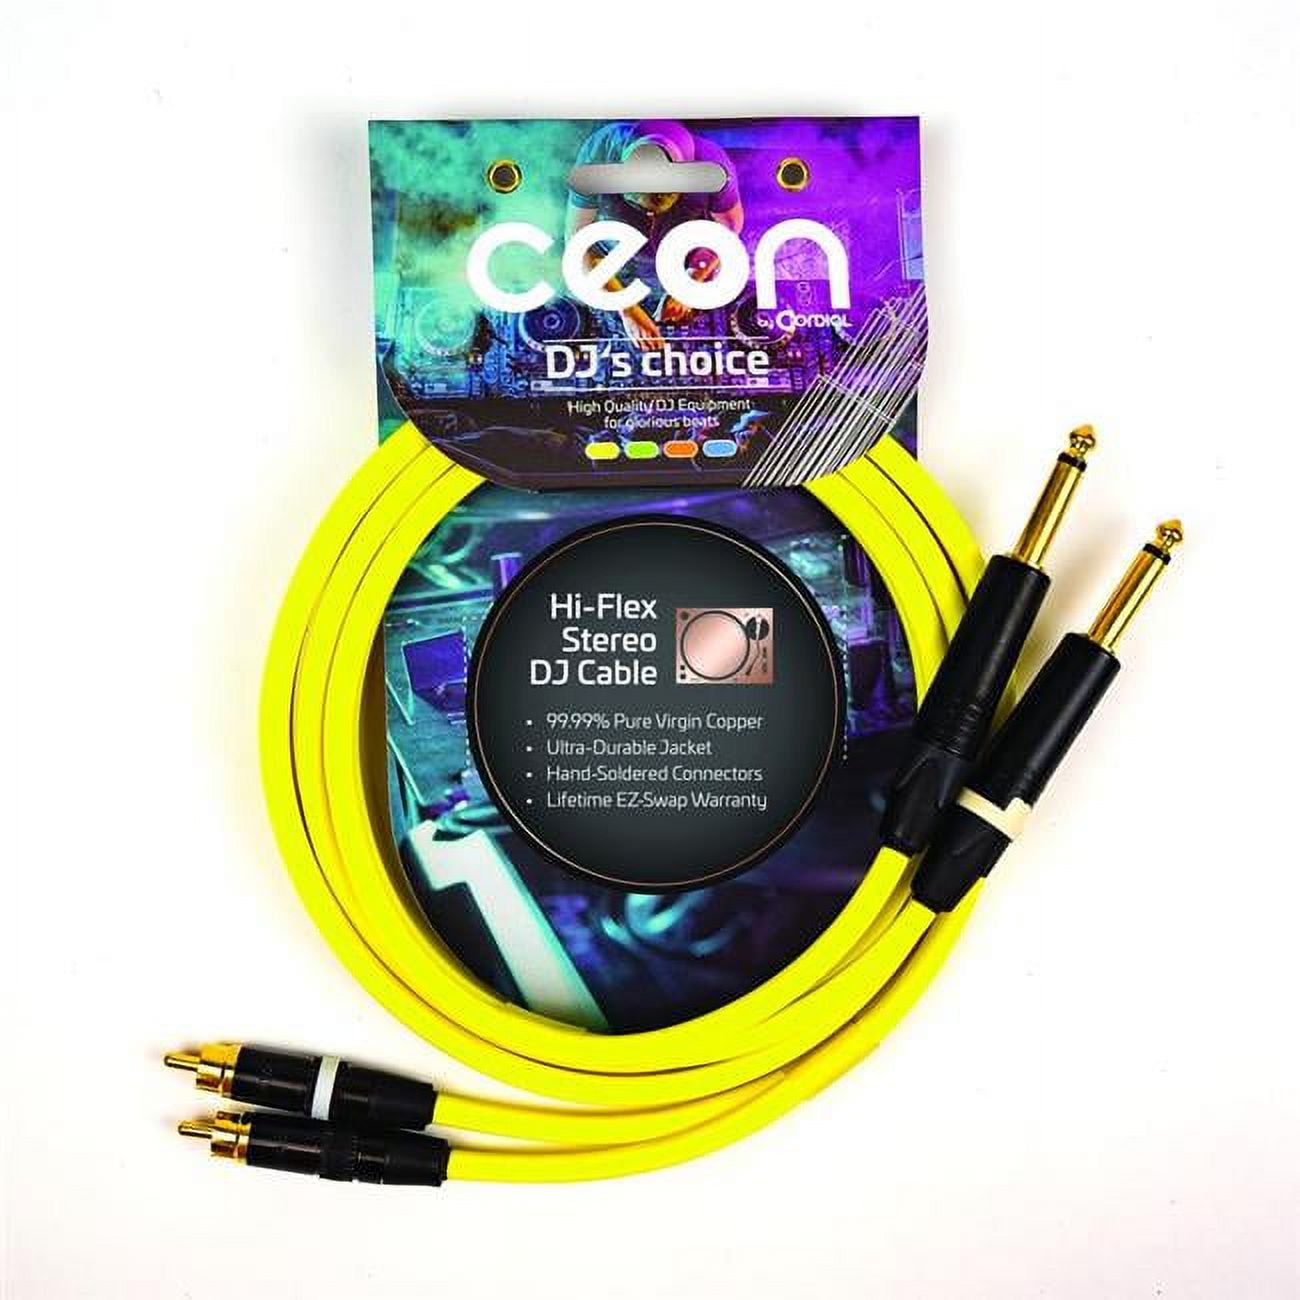 Cordial Cables 3719597 0.25 in. TS Choice Stereo RCA Premium DJ Dual & Mono Black Light - Ceon Series - 10 ft. Cable, Neon Yellow - image 1 of 2